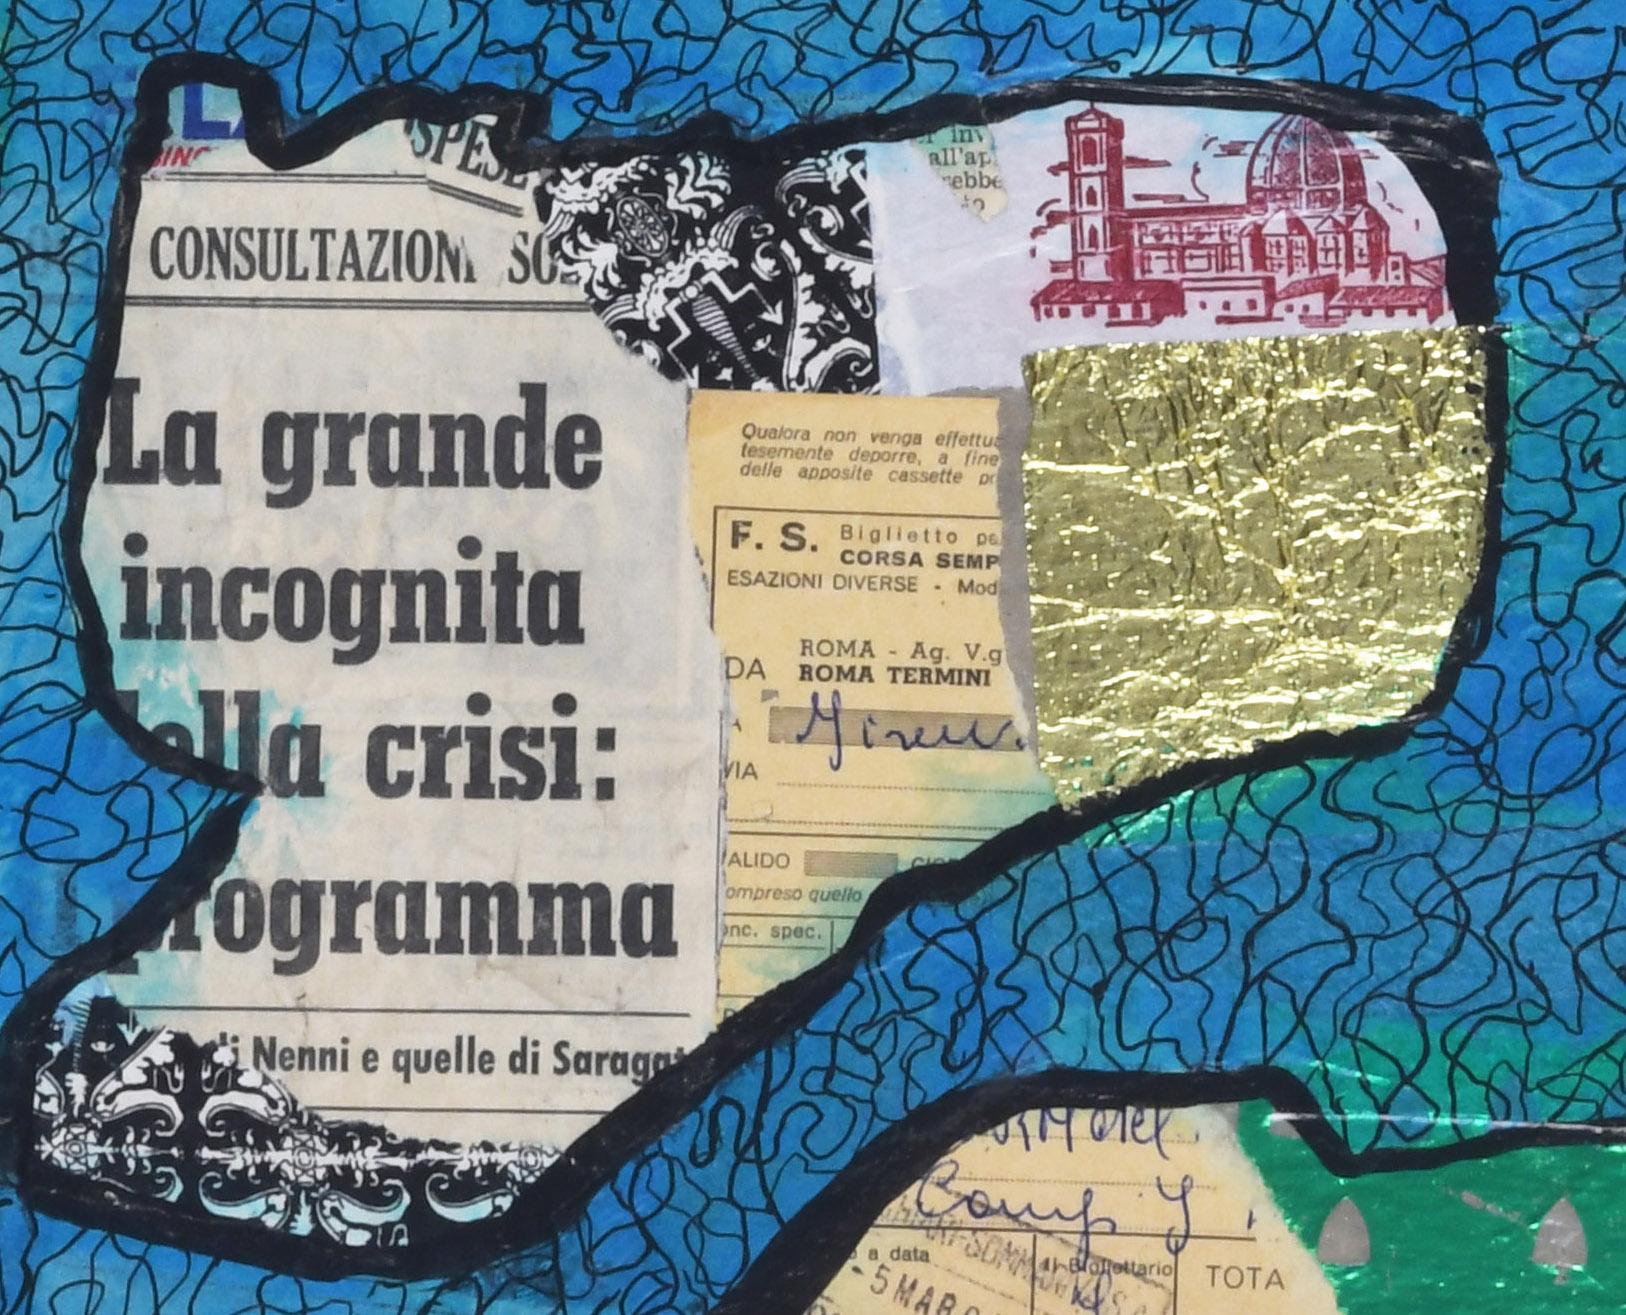 La grande incognita (The great unknown)
Collage elements with paint, paint and paper foil, 1964
1964
Created while the artist was studying at the Accademia d'Arte, Florence
Signed and dated bottom center edge (see photo)
Provenance: Estate of the